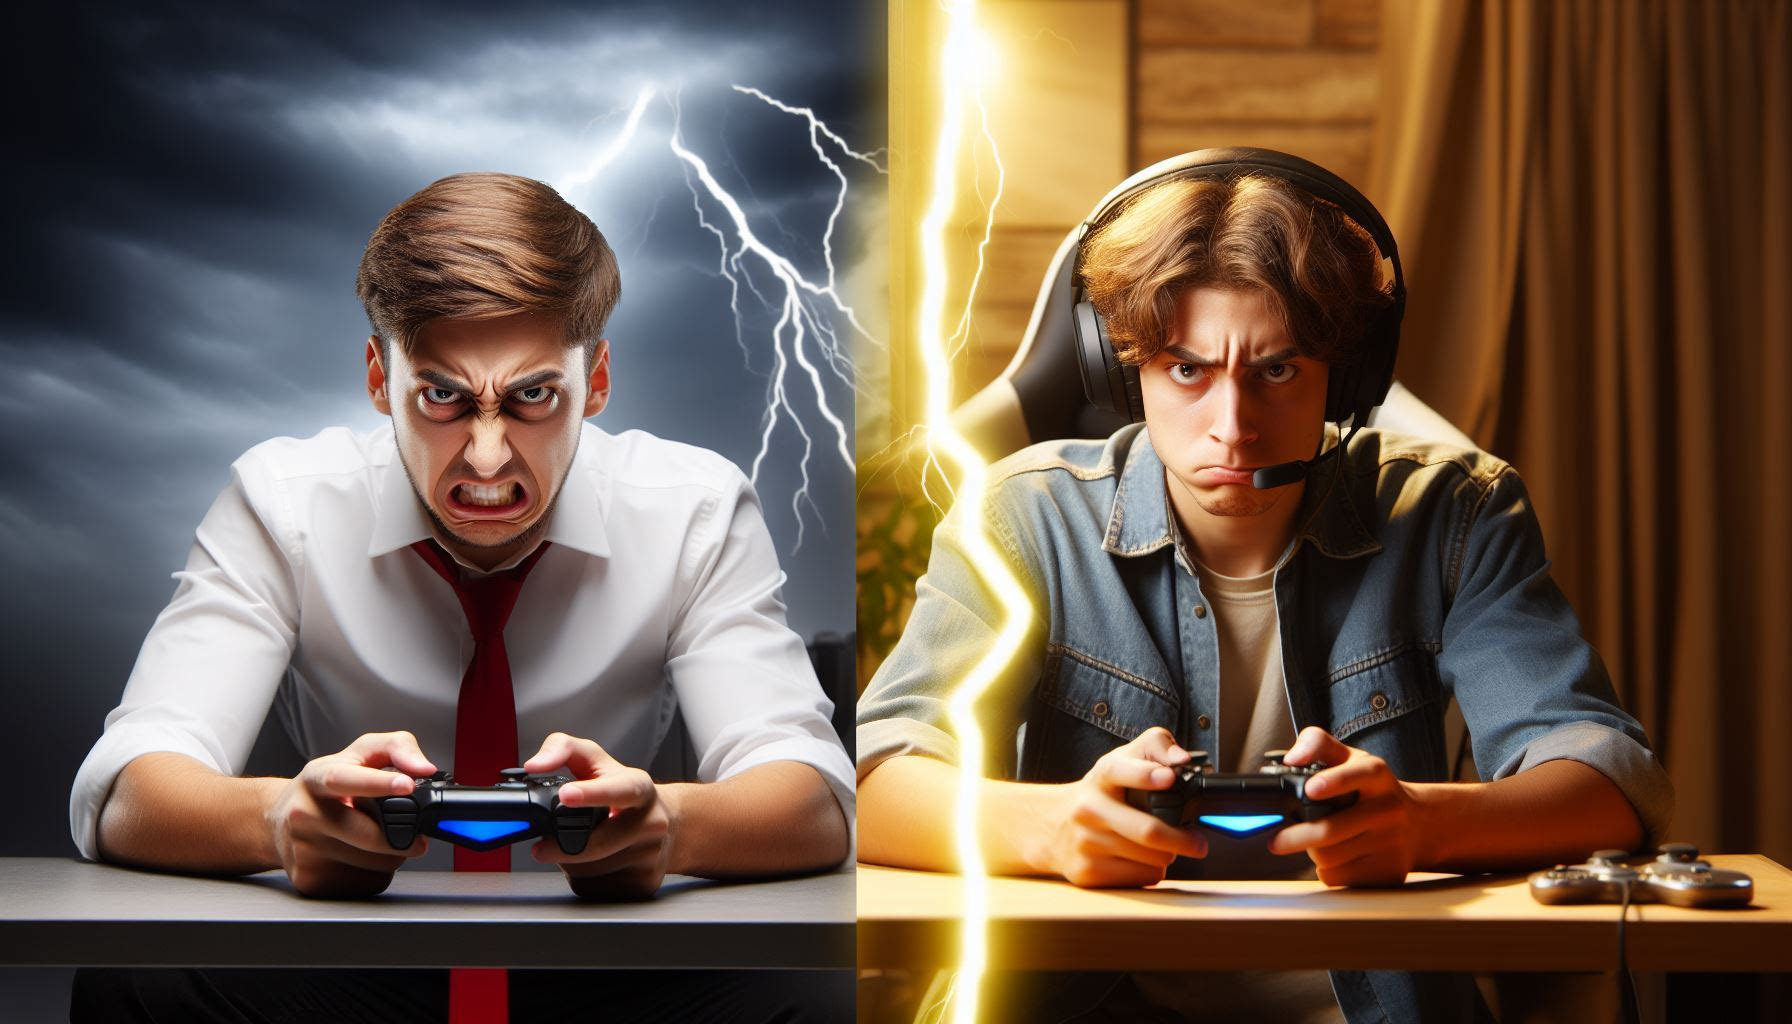 Gaming and Anger Connection